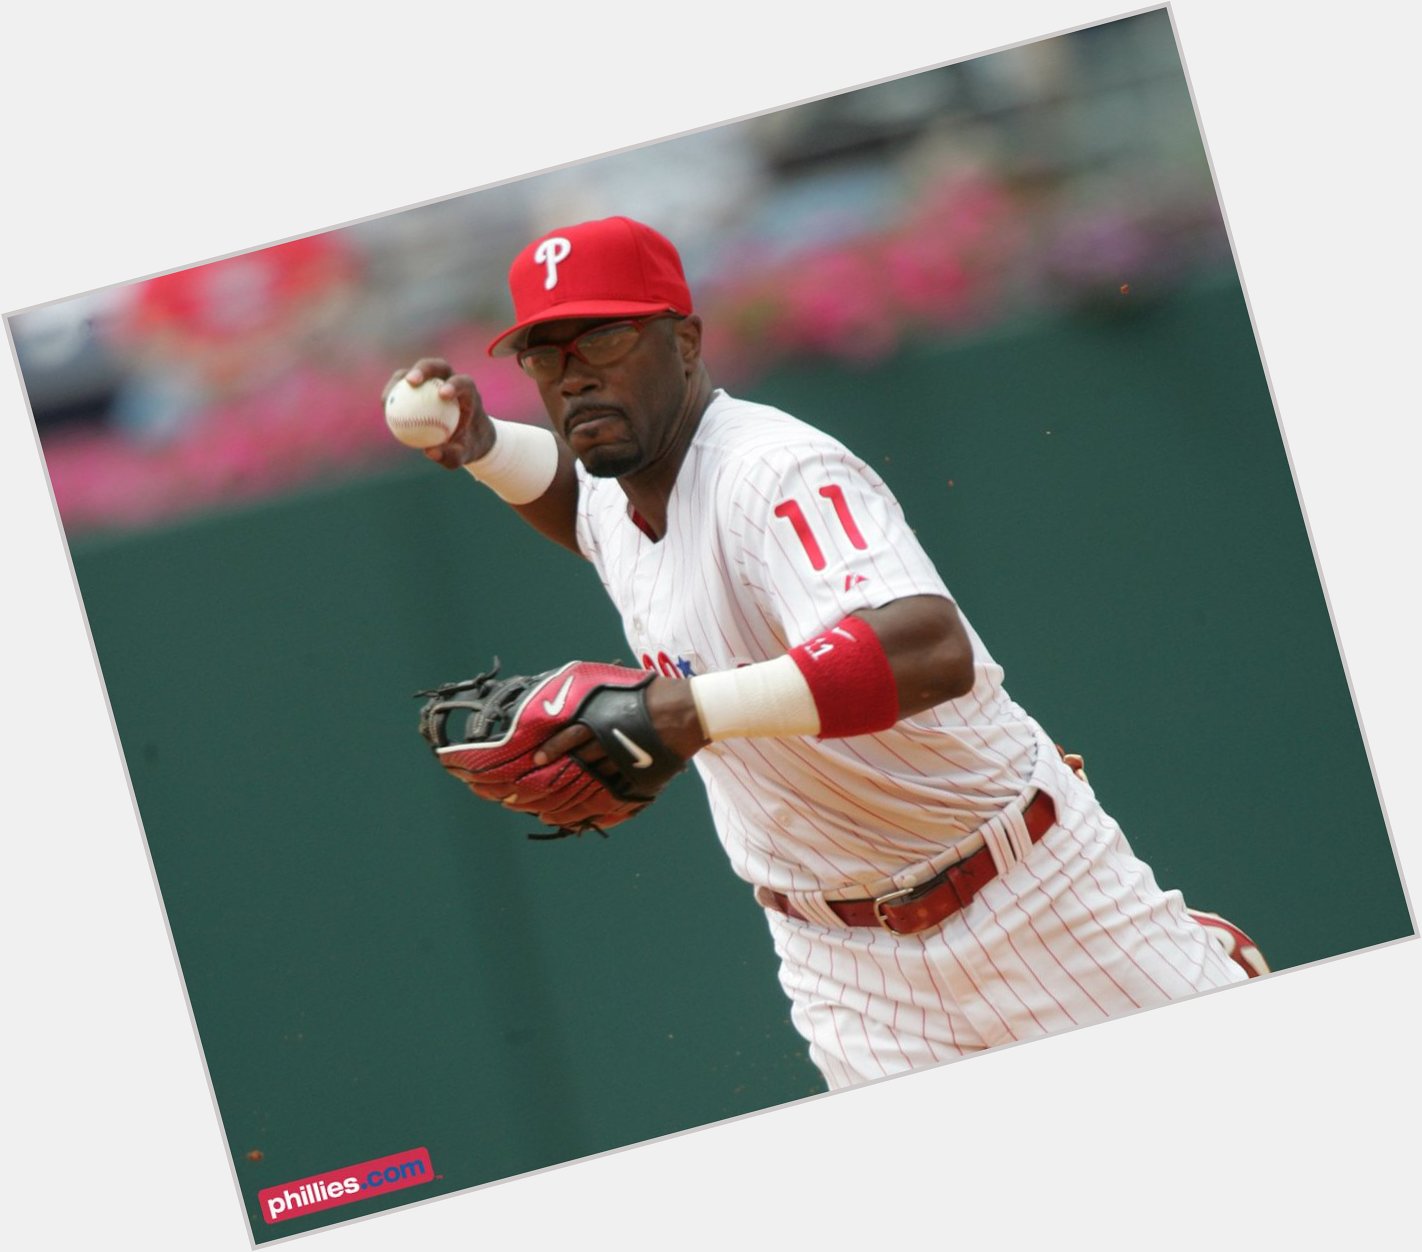 Happy Birthday to Jimmy Rollins who turns 39 today! 